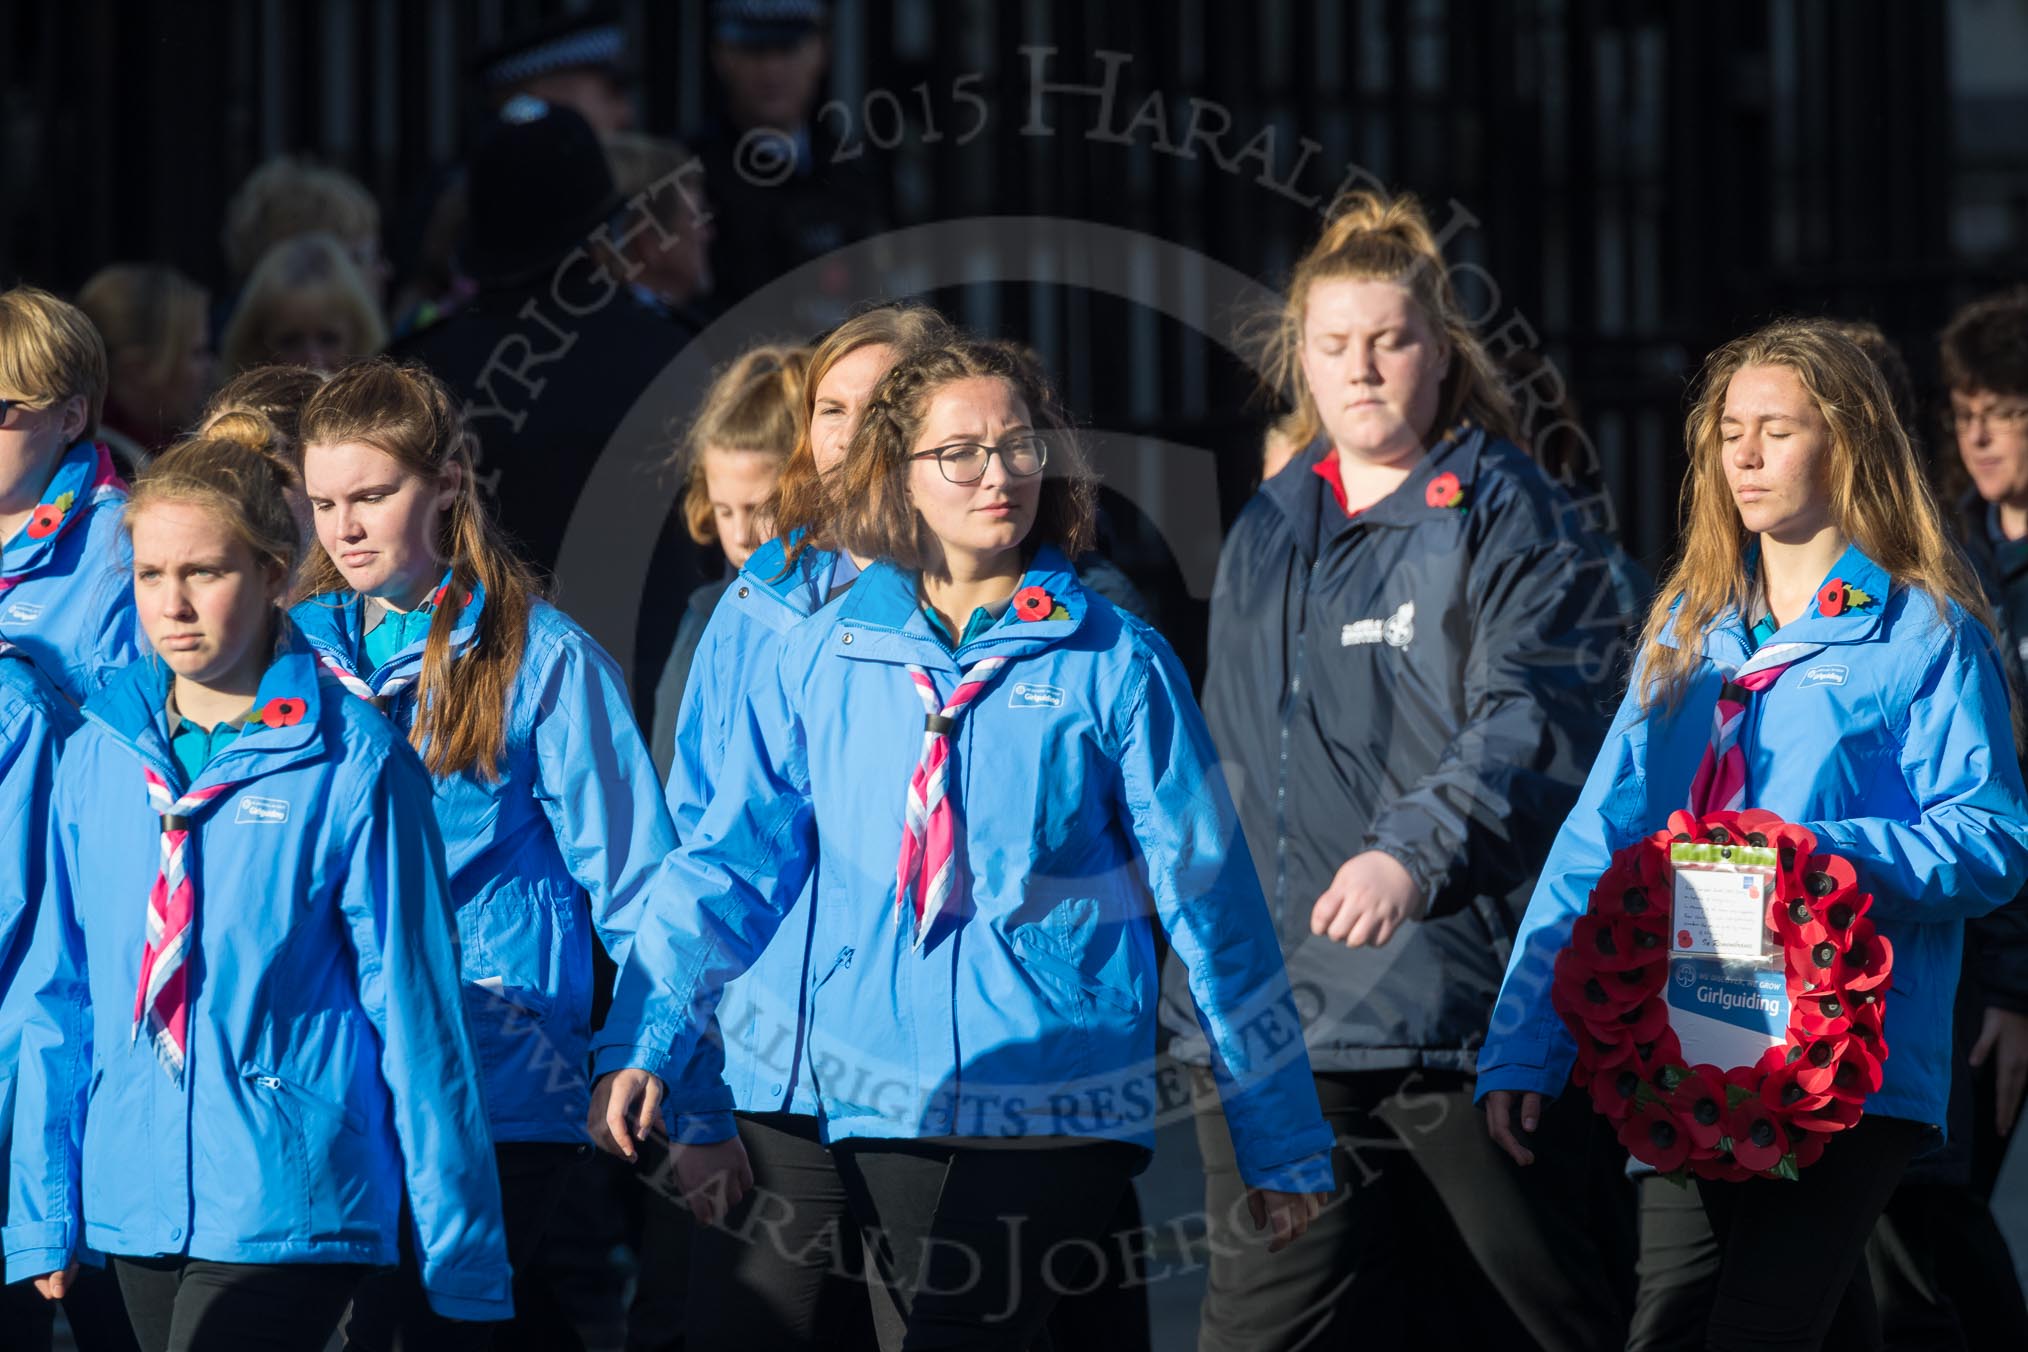 March Past, Remembrance Sunday at the Cenotaph 2016: M34 Girlguiding UK.
Cenotaph, Whitehall, London SW1,
London,
Greater London,
United Kingdom,
on 13 November 2016 at 13:18, image #2862